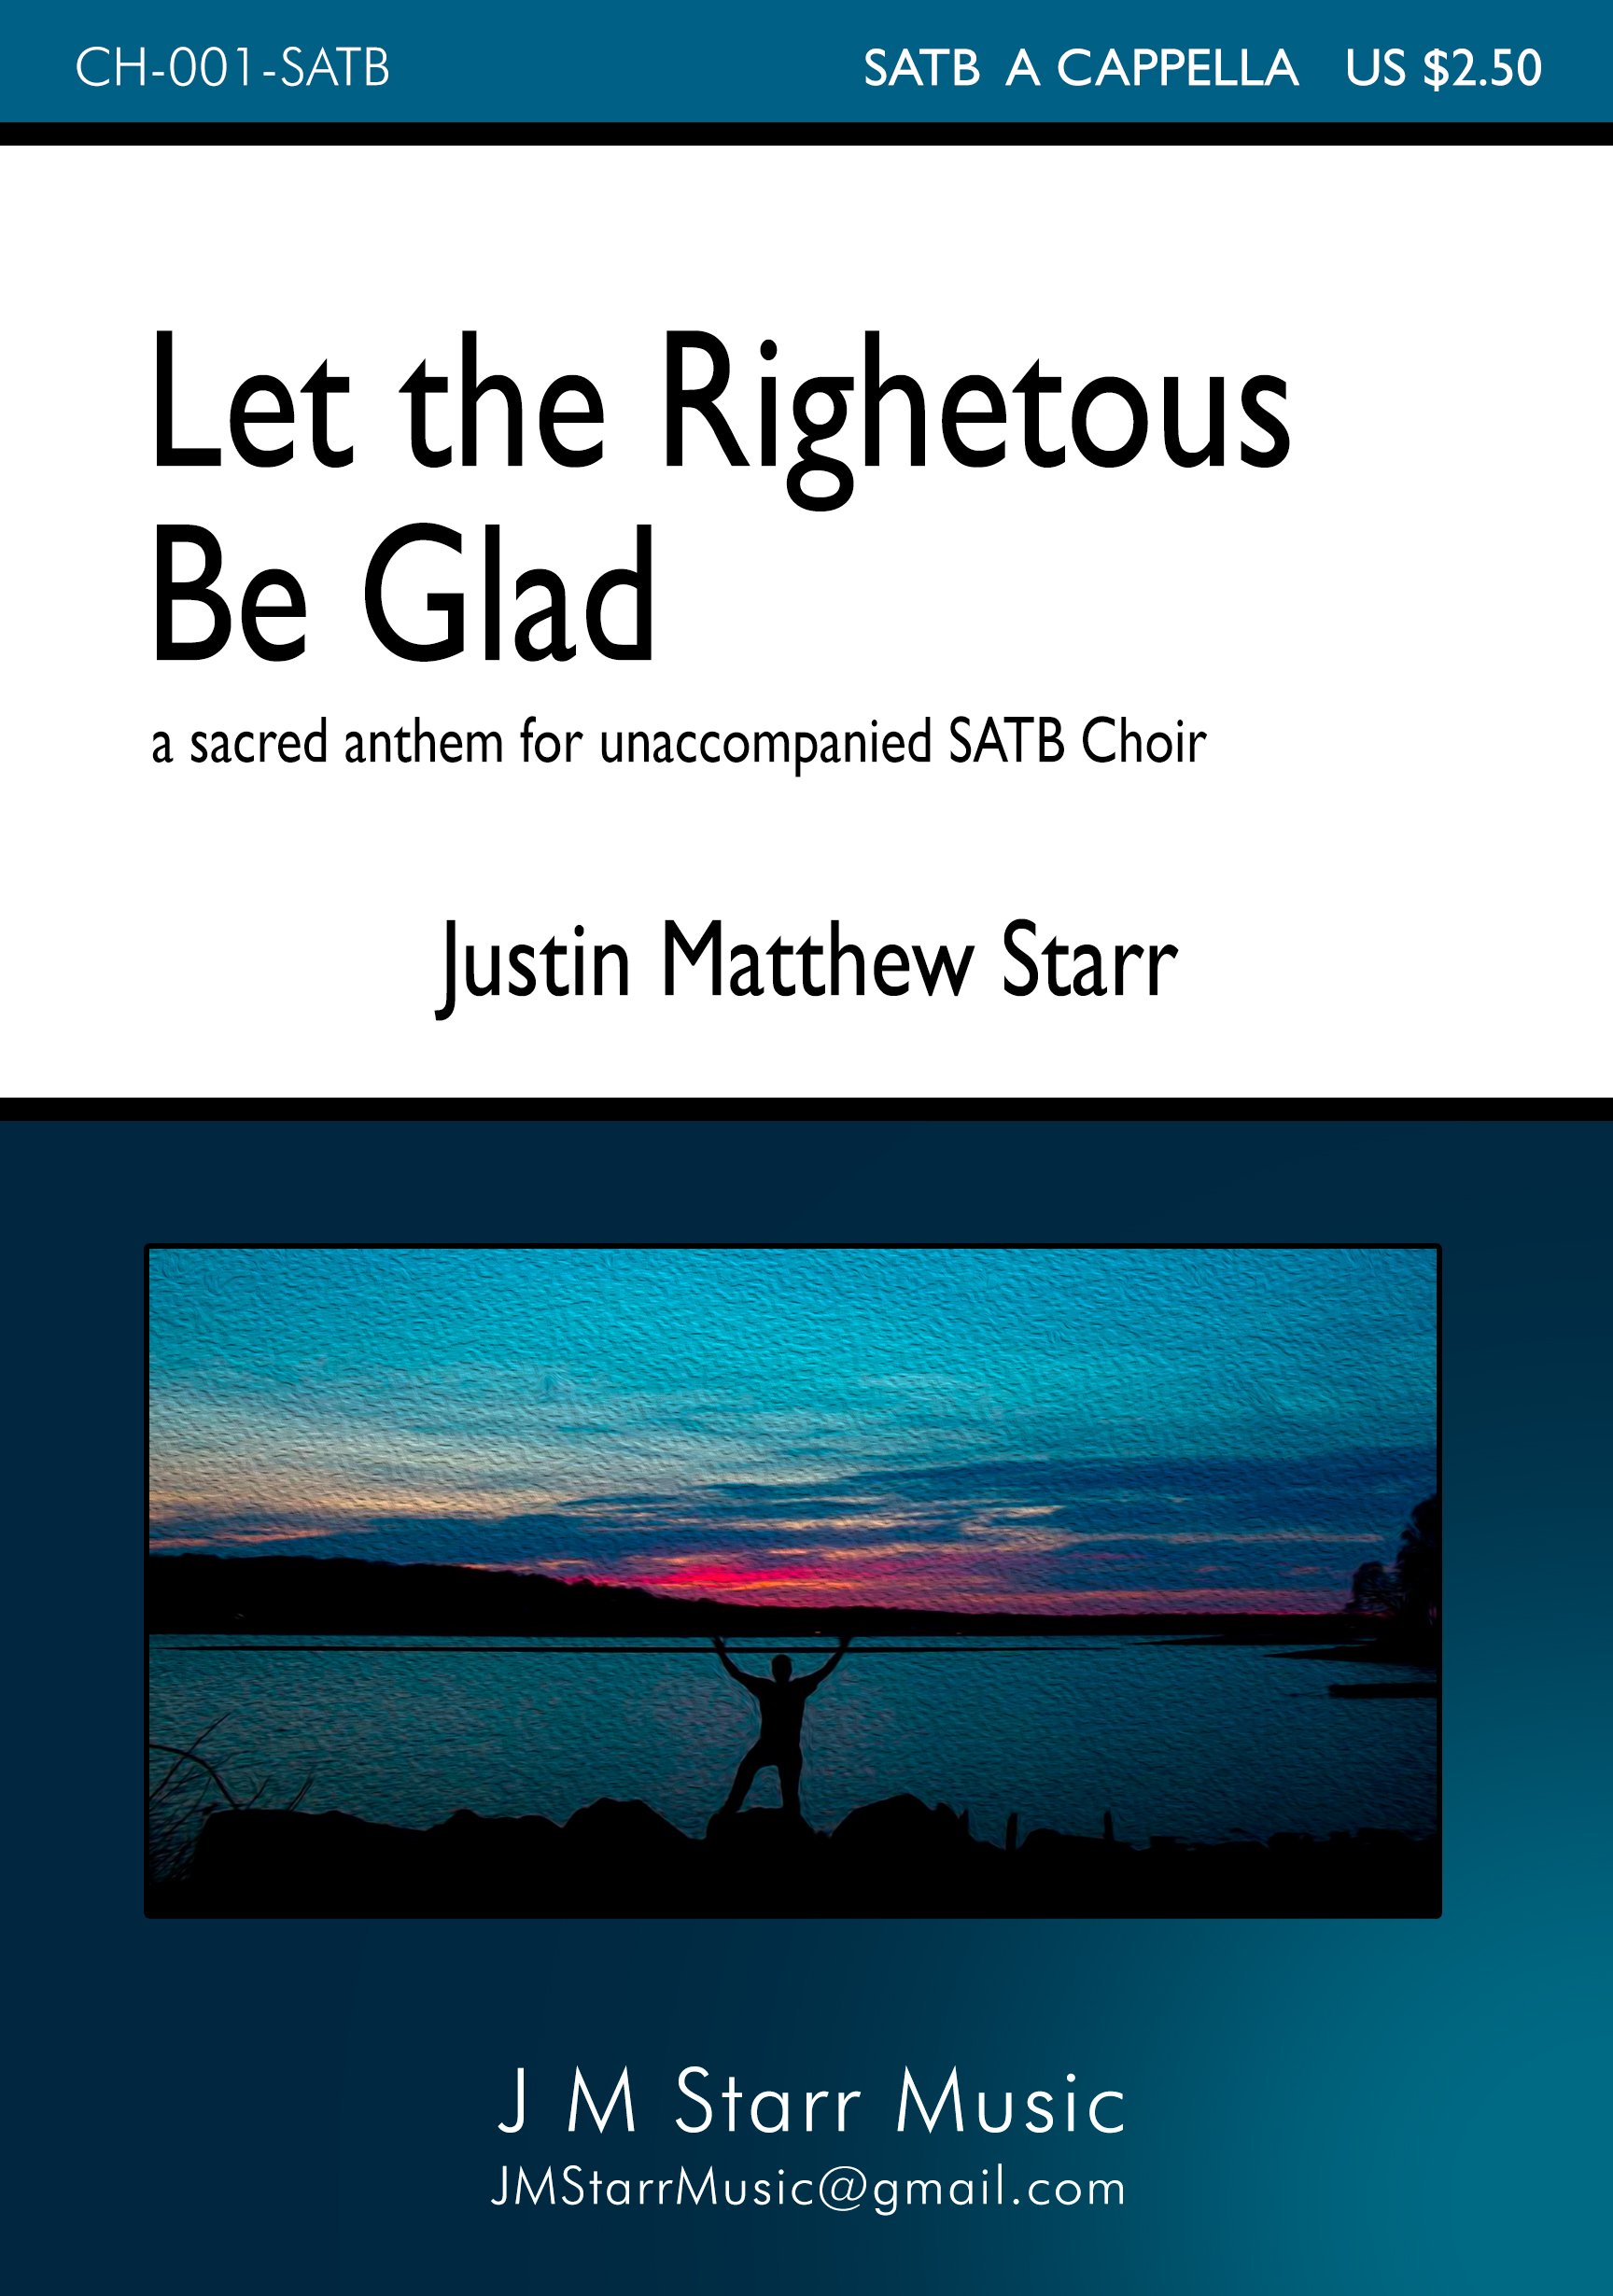 Let the Righteous Be Glad